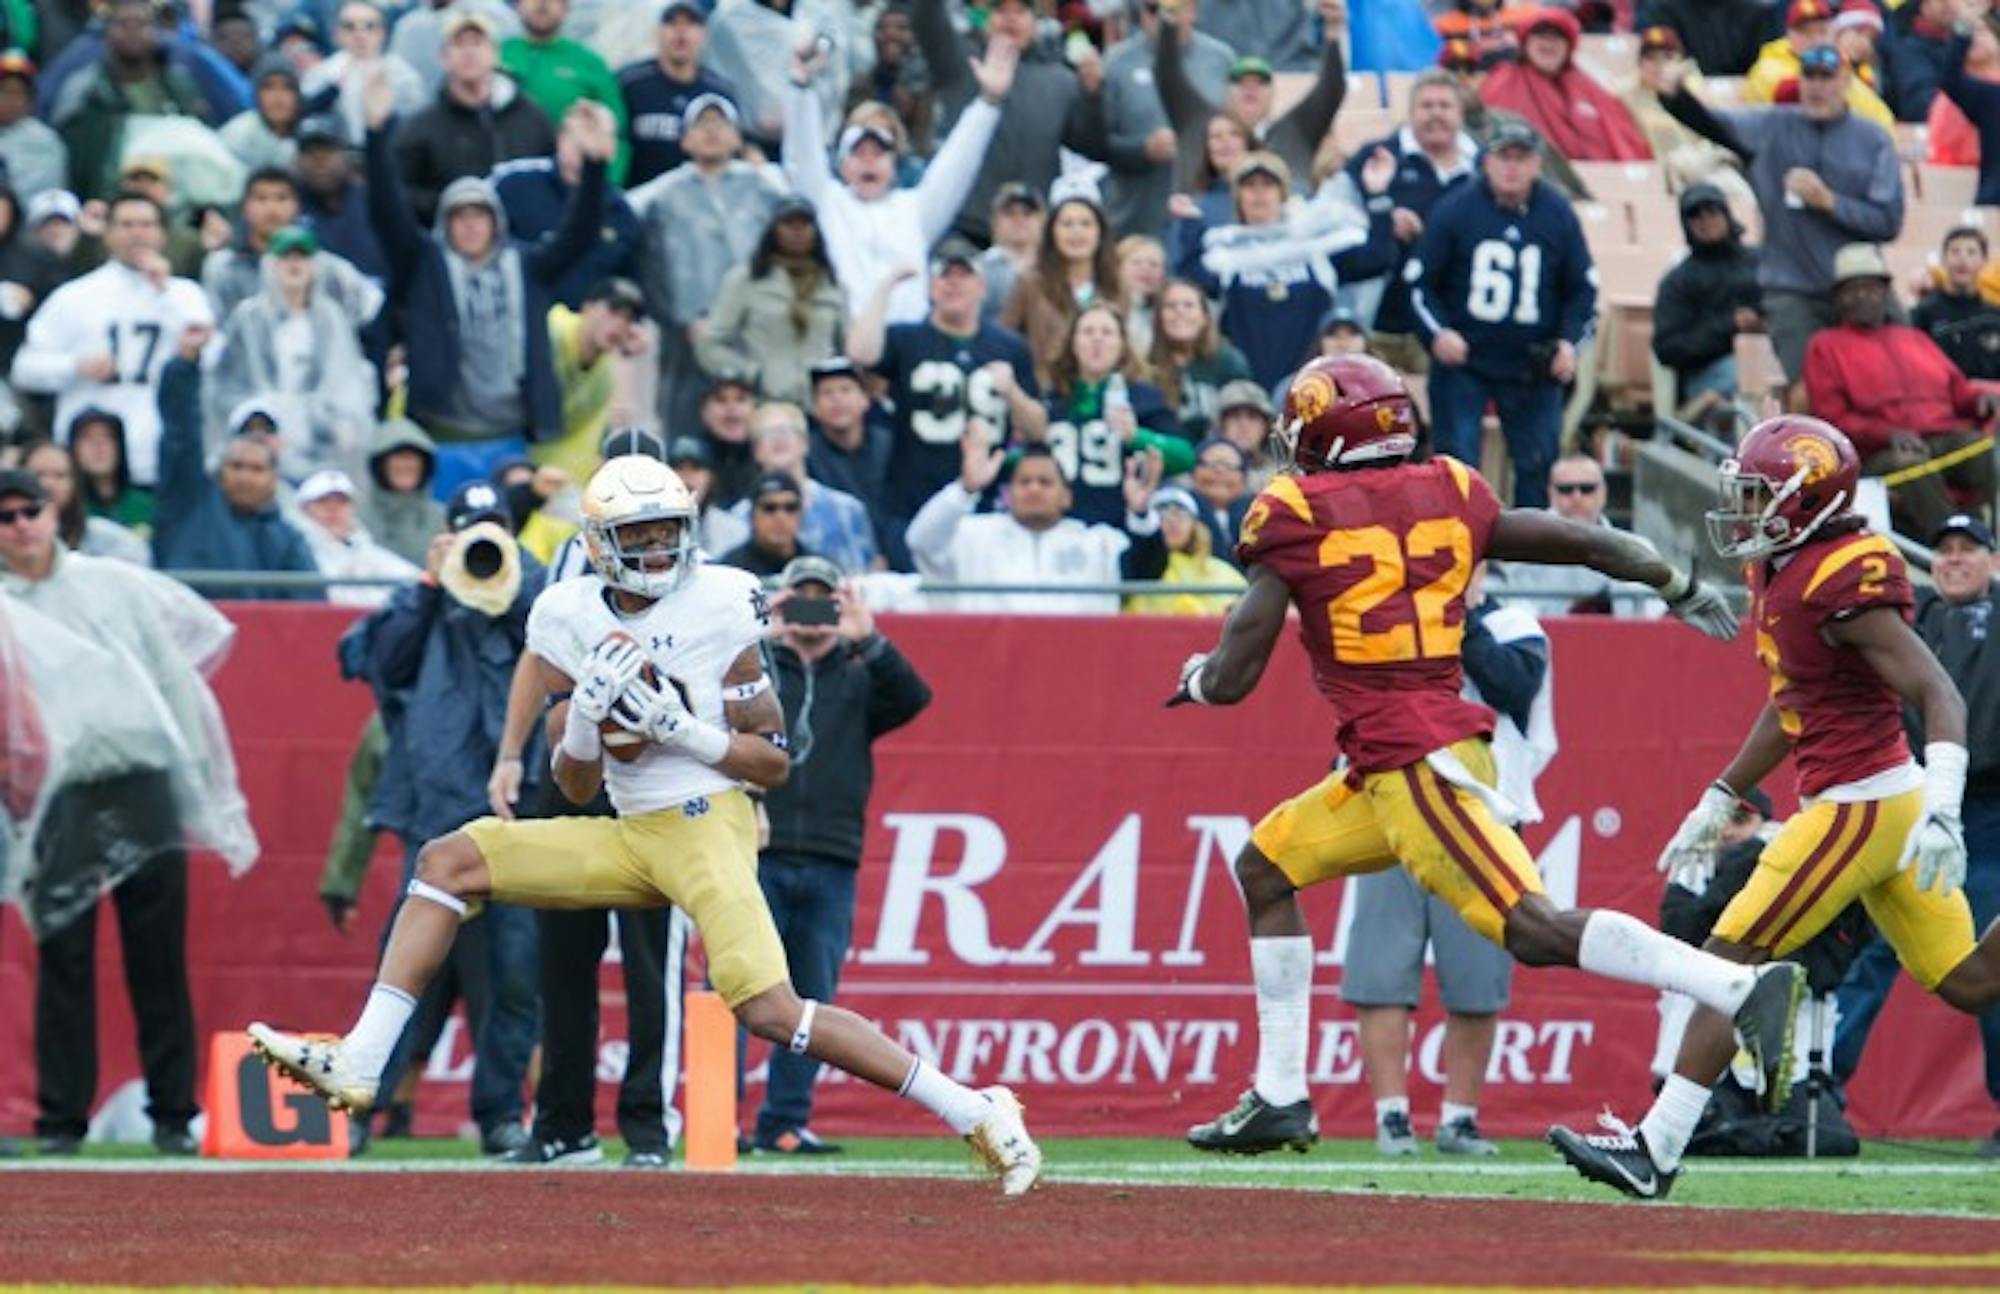 Irish sophomore wide receiver Kevin Stepherson hauls in a touchdown pass during Notre Dame's 49-24 loss to USC on Nov. 26, 2016.